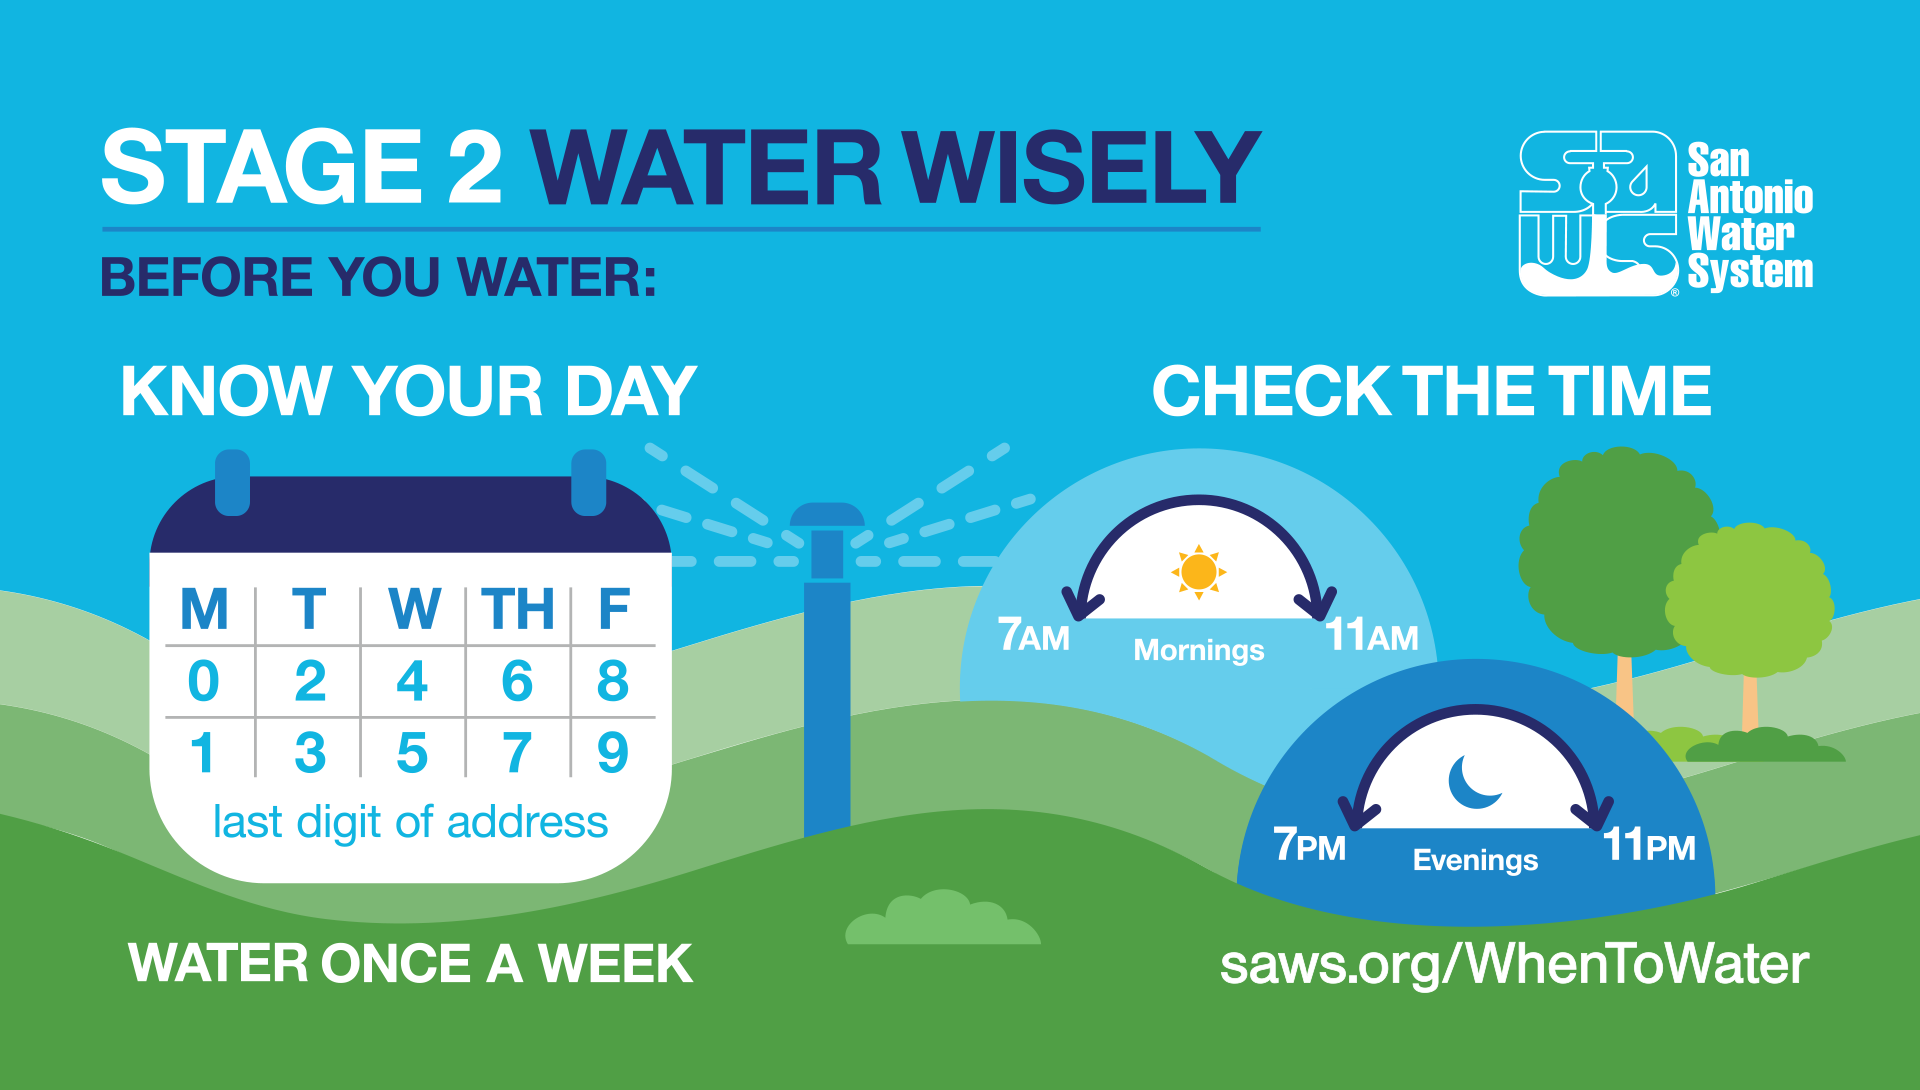 Stage 2: Water Wisely